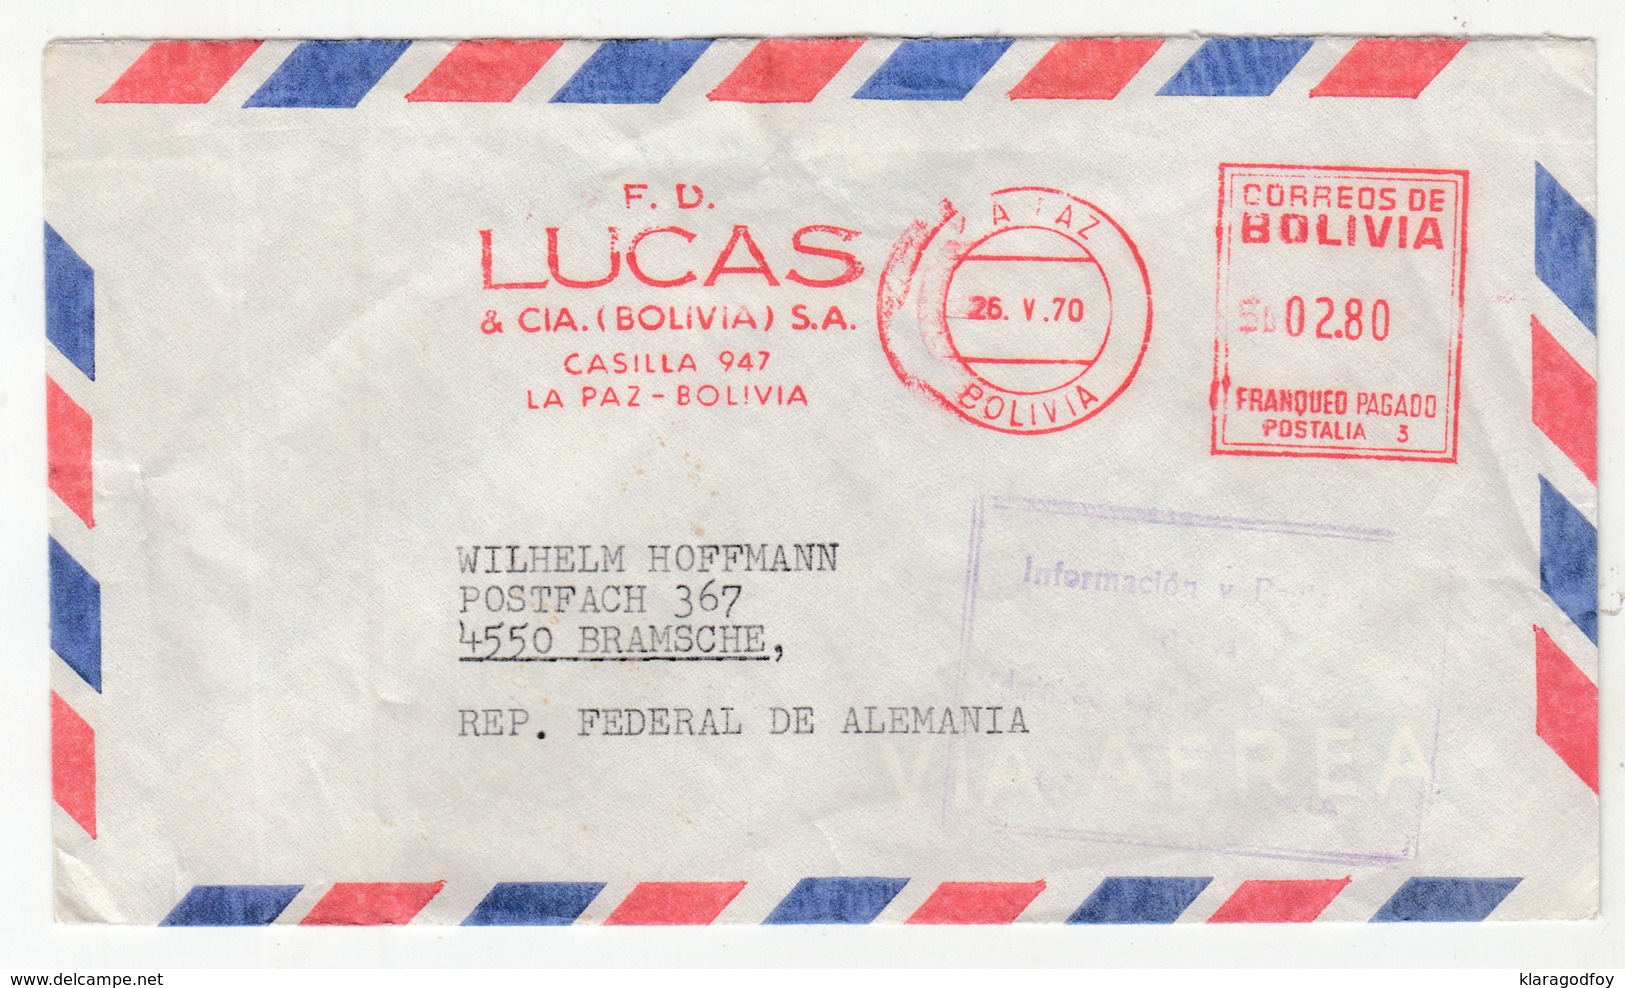 Bolivia Lucas La Paz Meter Stamp On 2 Air Mail Letter Covers Travelled 1970/76 To Germany B190520 - Bolivia